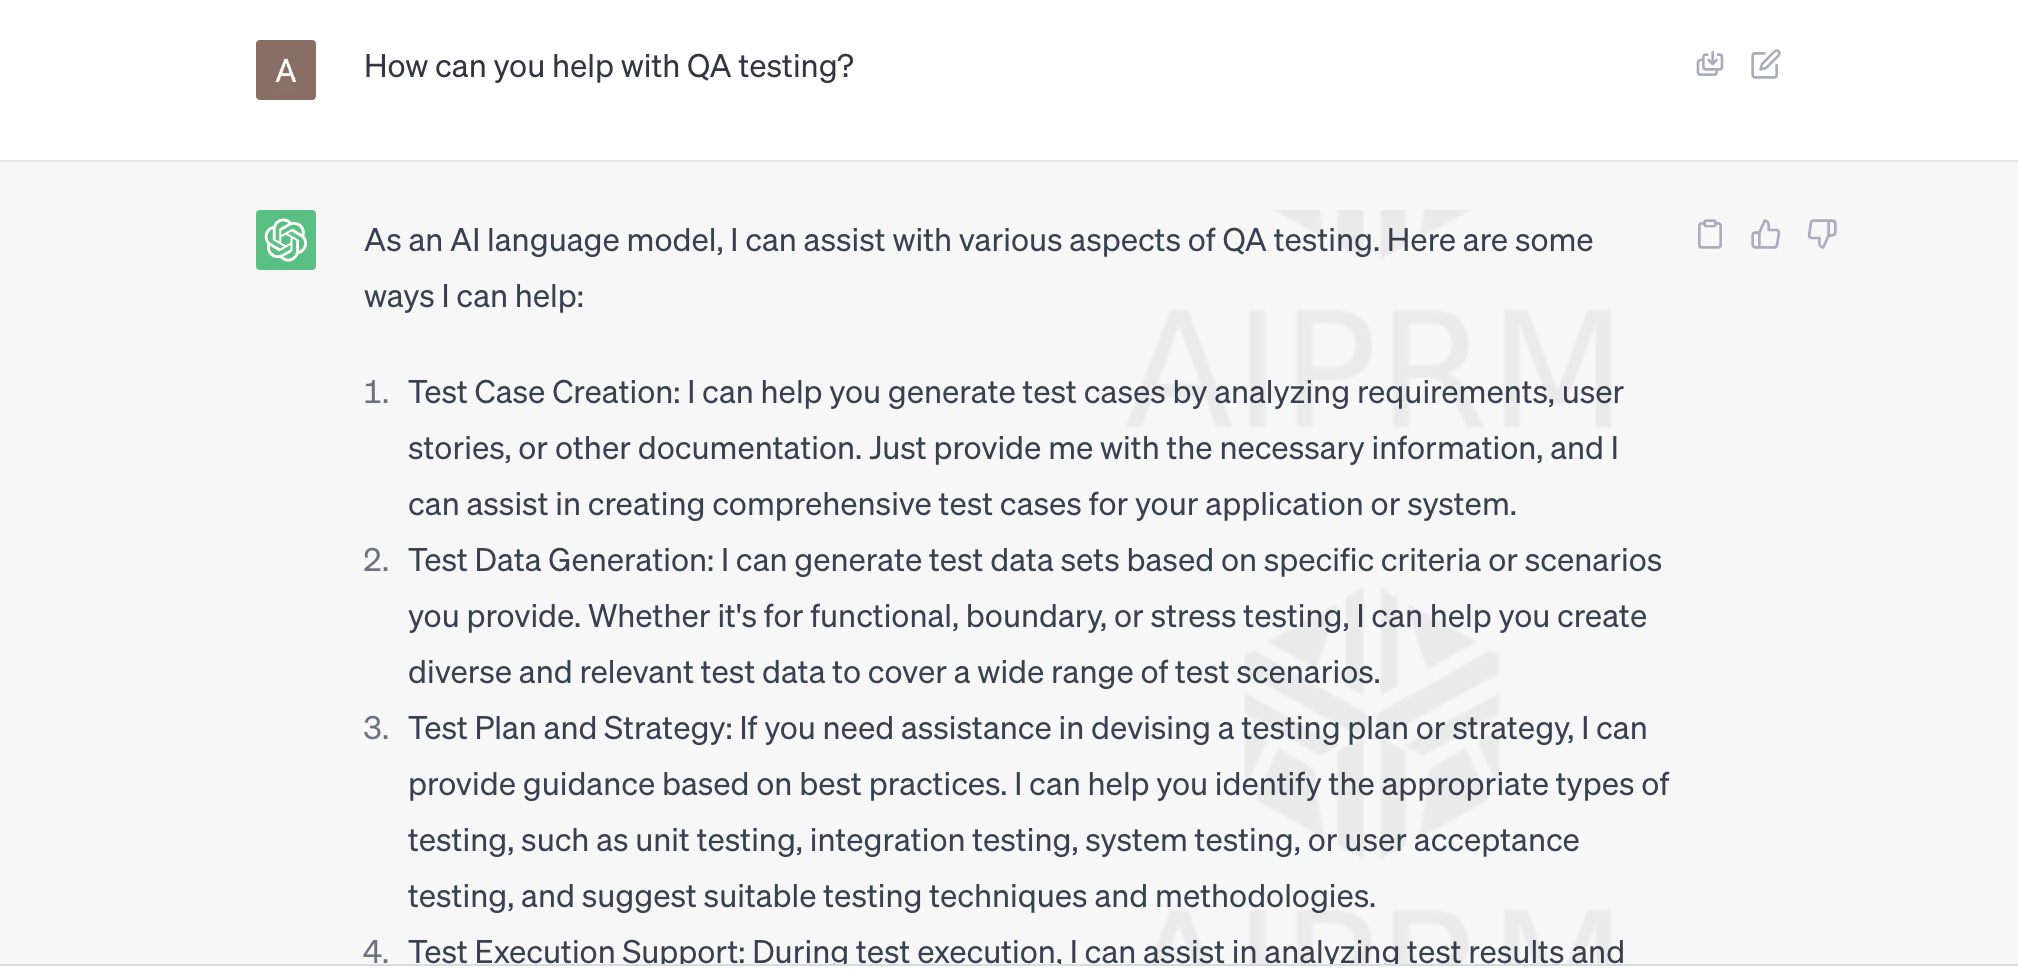 Asking ChatGPT “ how can you help with QA testing?” and the output generated by ChatGPT